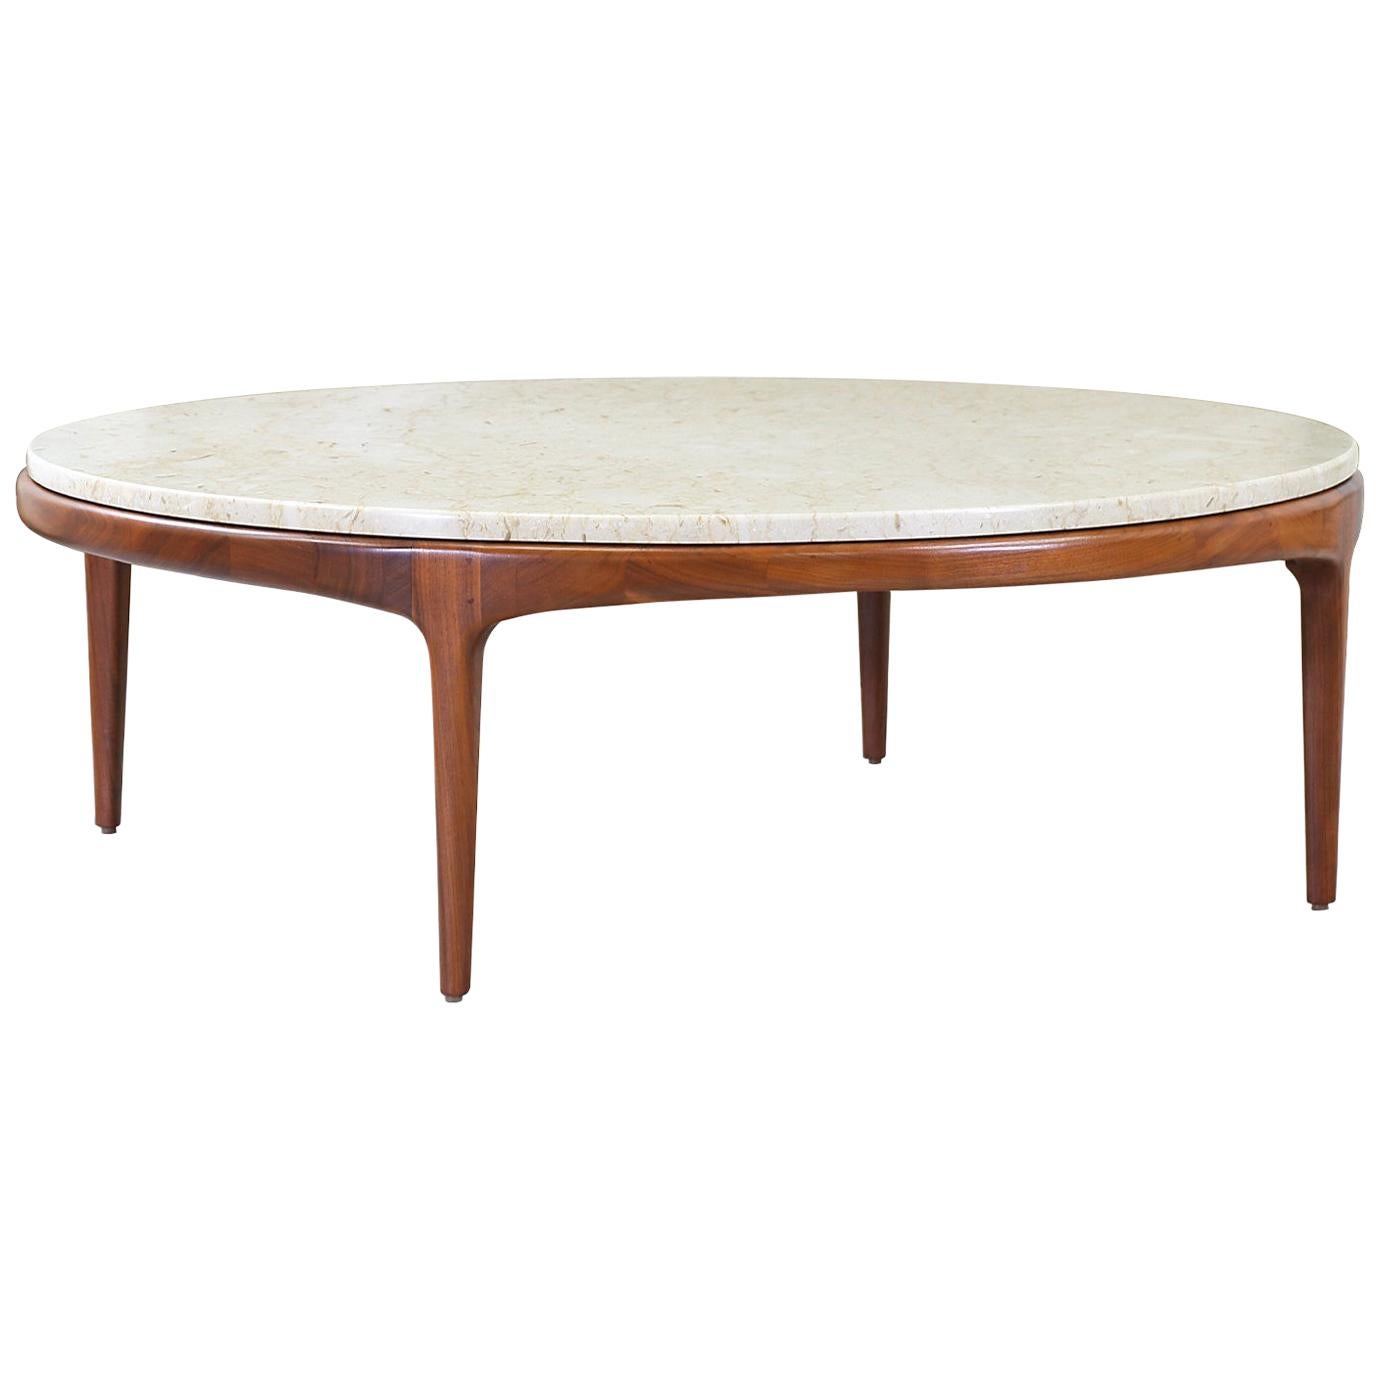 Mid-Century Modern “Rythm” Coffee Table with Travertine Top by Lane